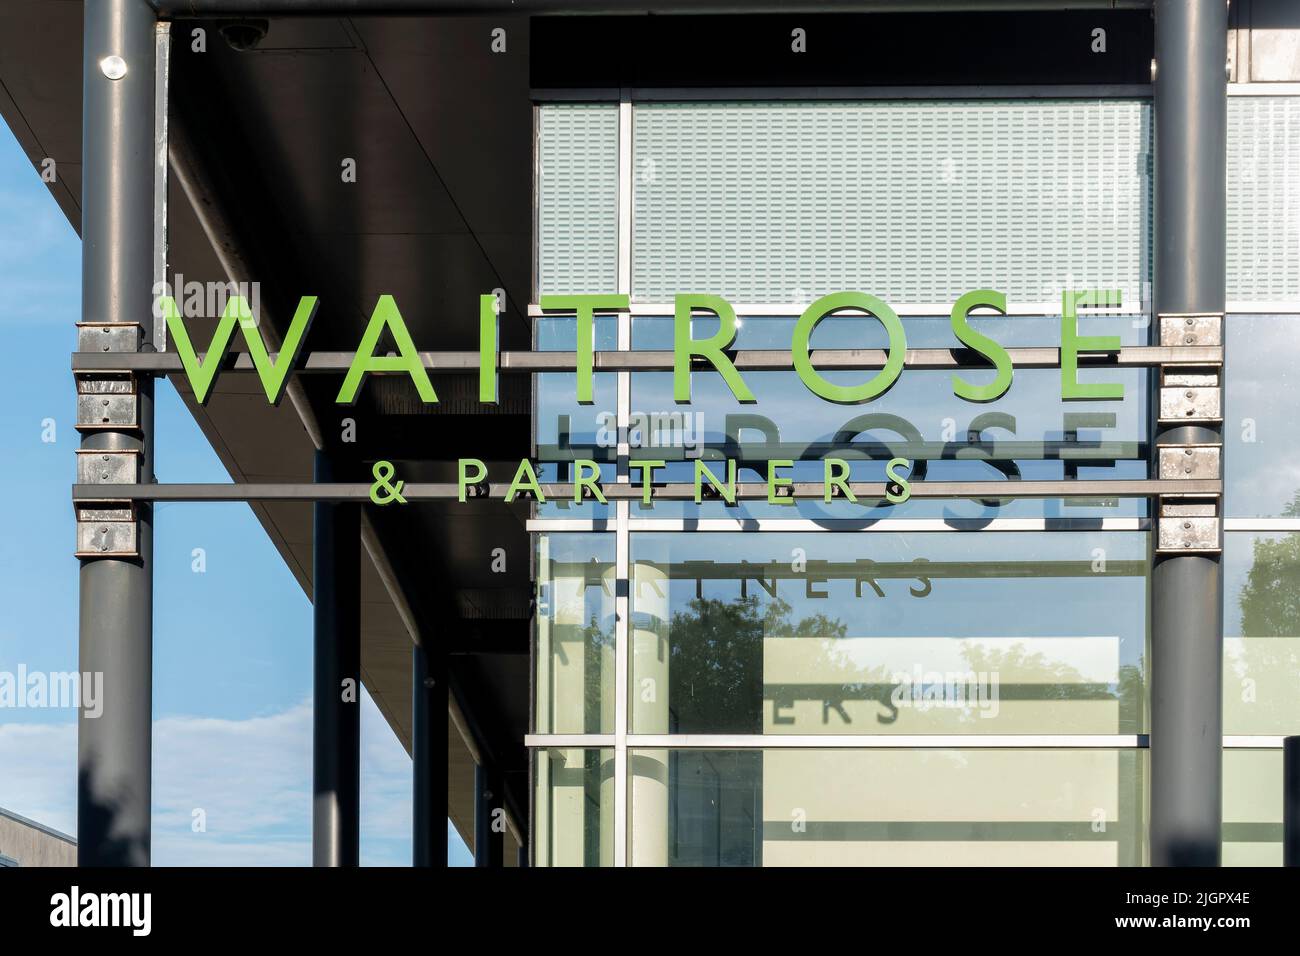 A Waitrose and partners shop sign displayed on the outside of one of their supermarkets. The sign is written in the shops branding and colours Stock Photo